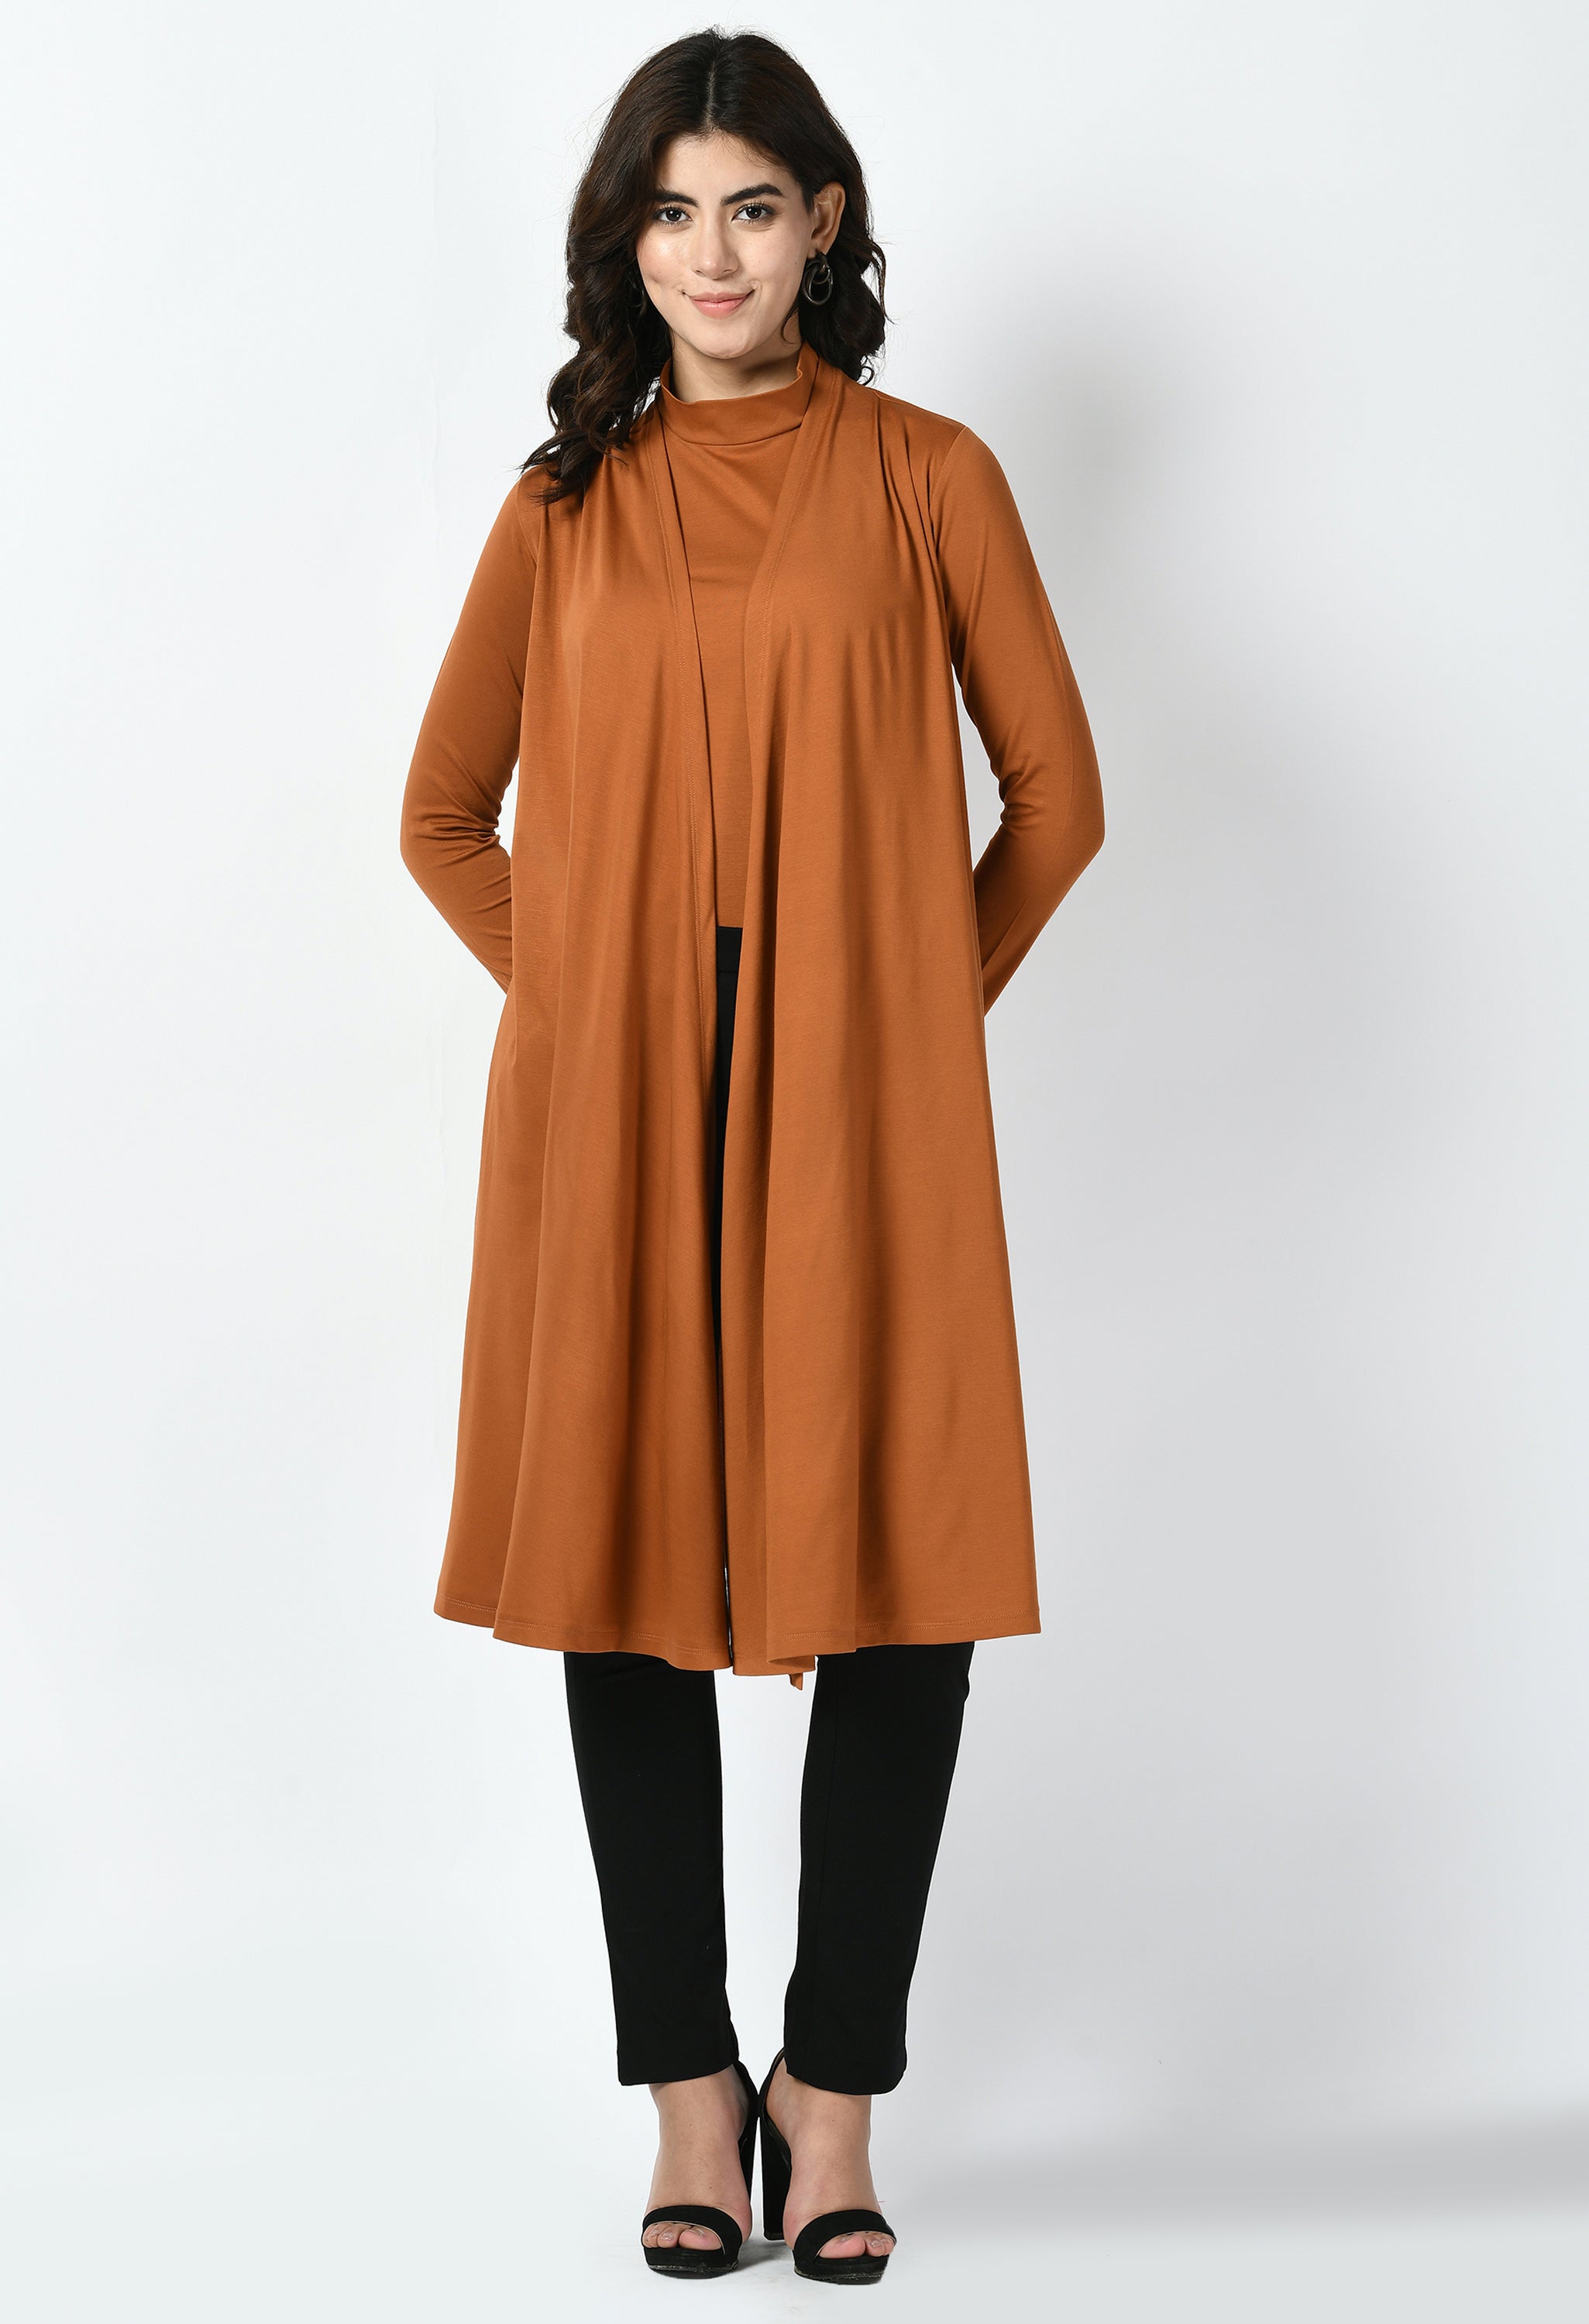 Exude Winsome High-neck T-shirt with Shrug (Tan Brown)